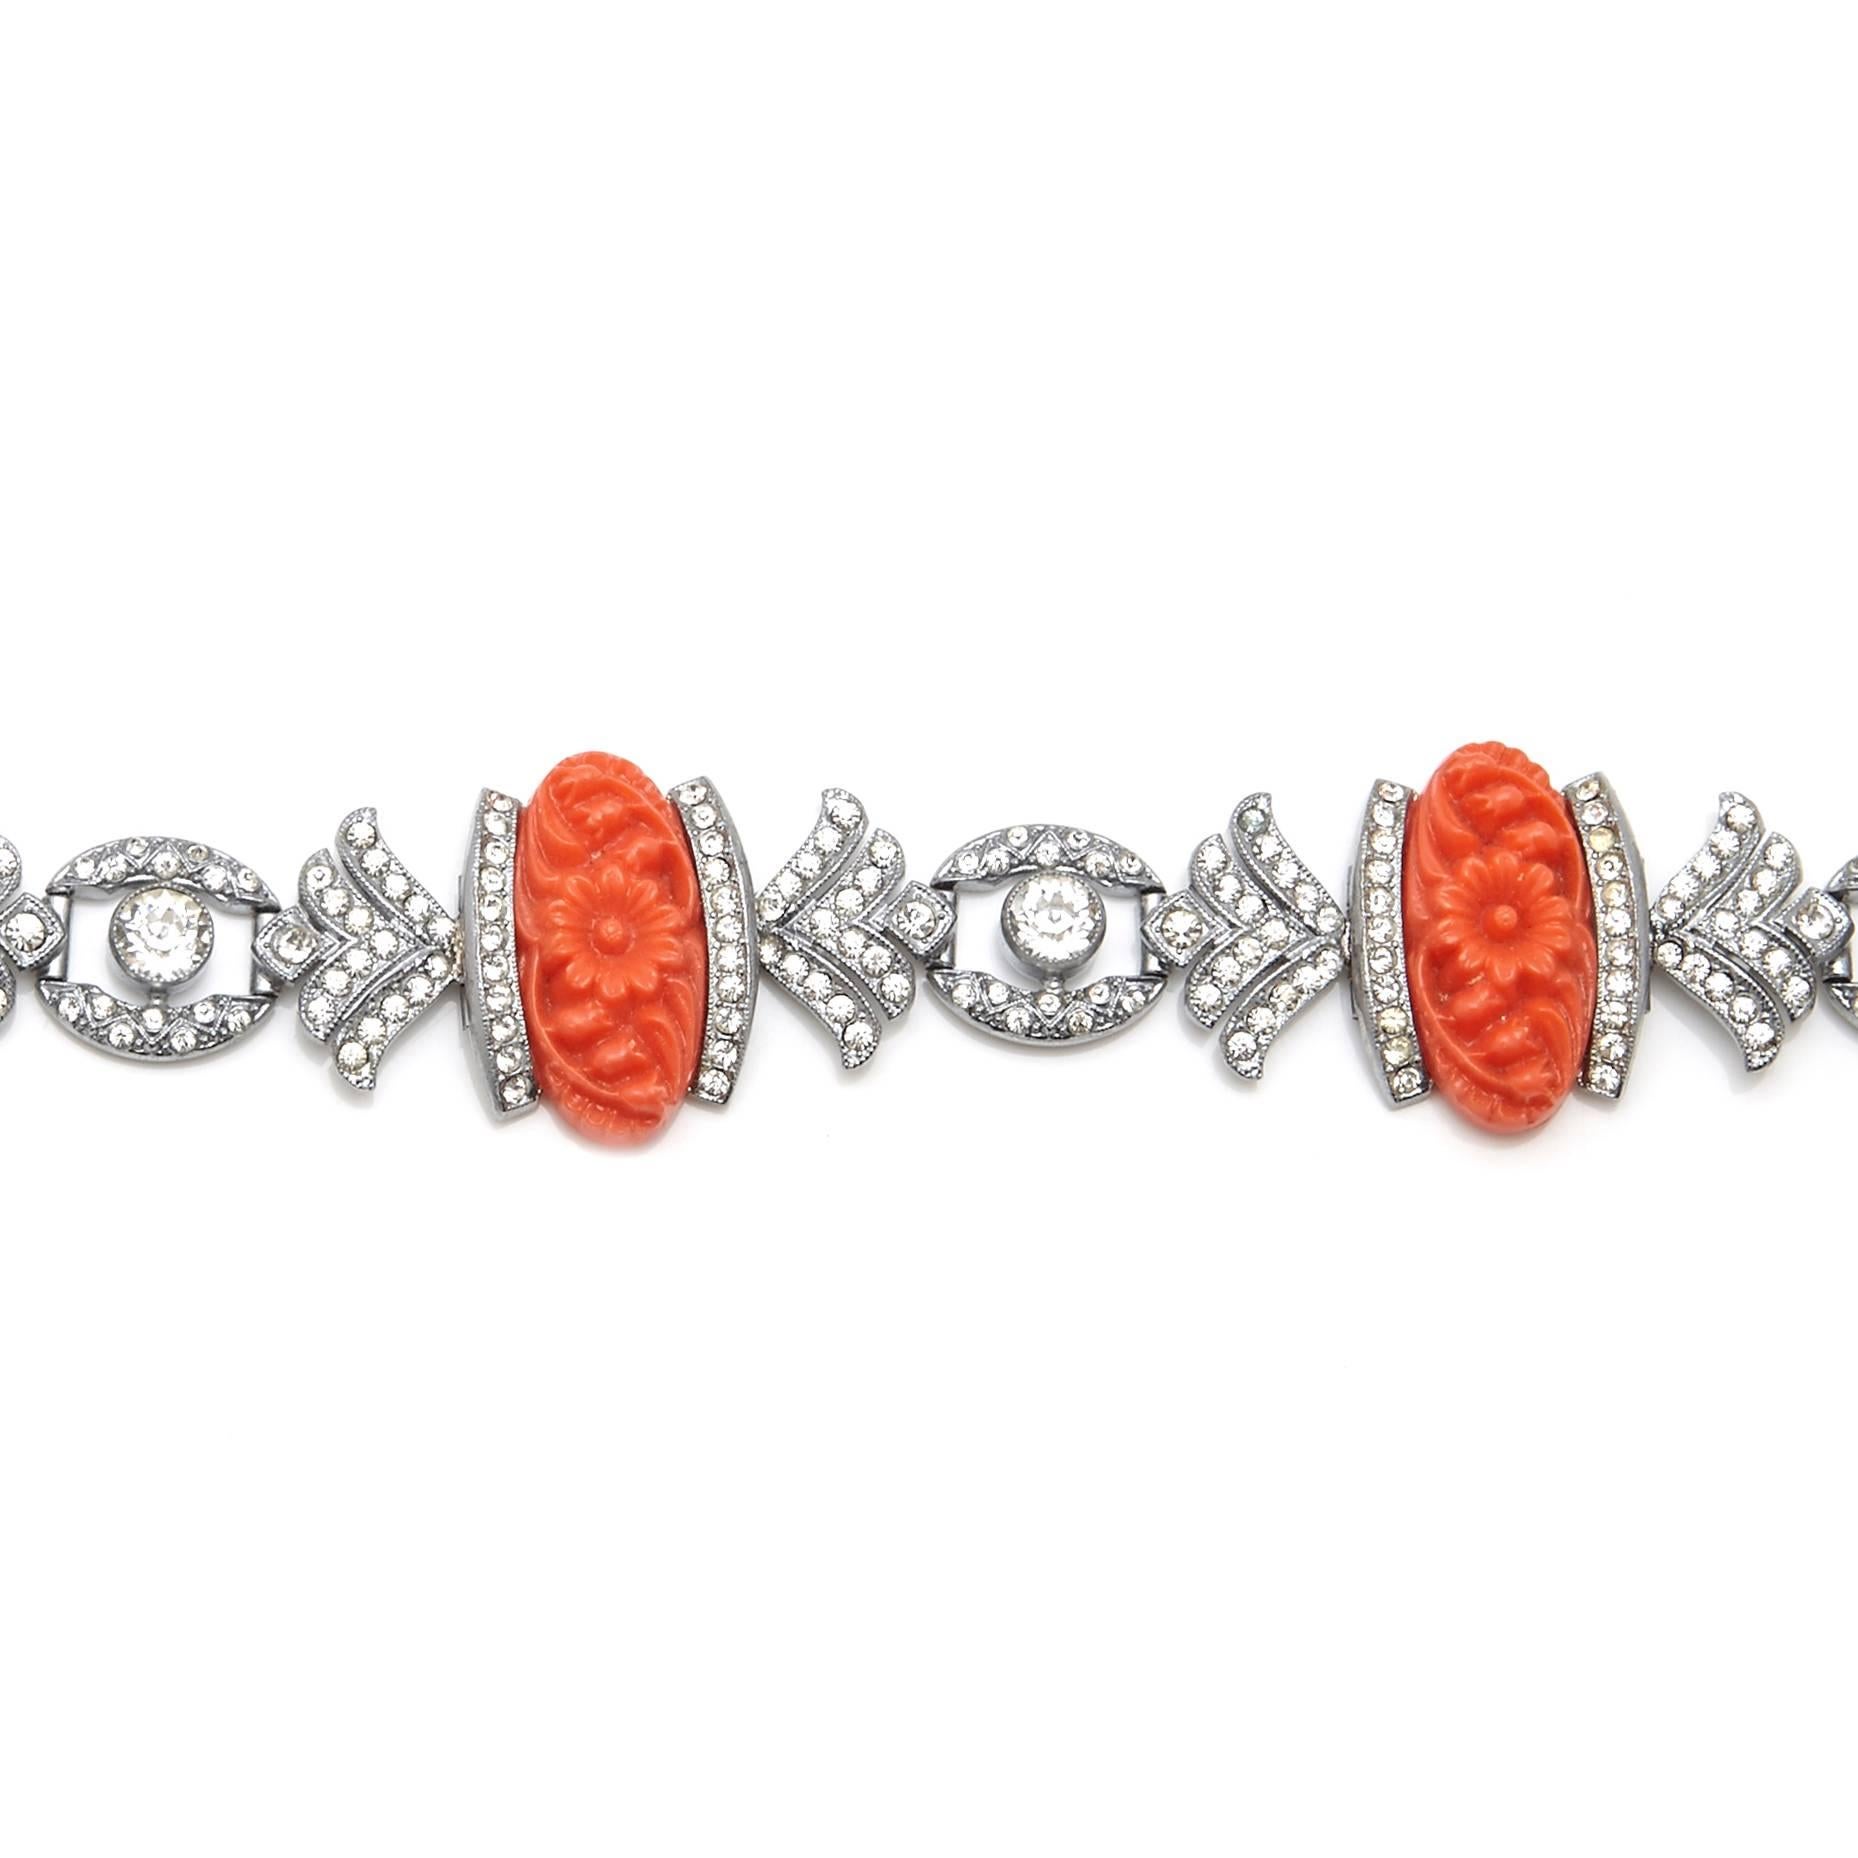 Vintage French Art Deco Coral Bracelet In Excellent Condition For Sale In London, GB